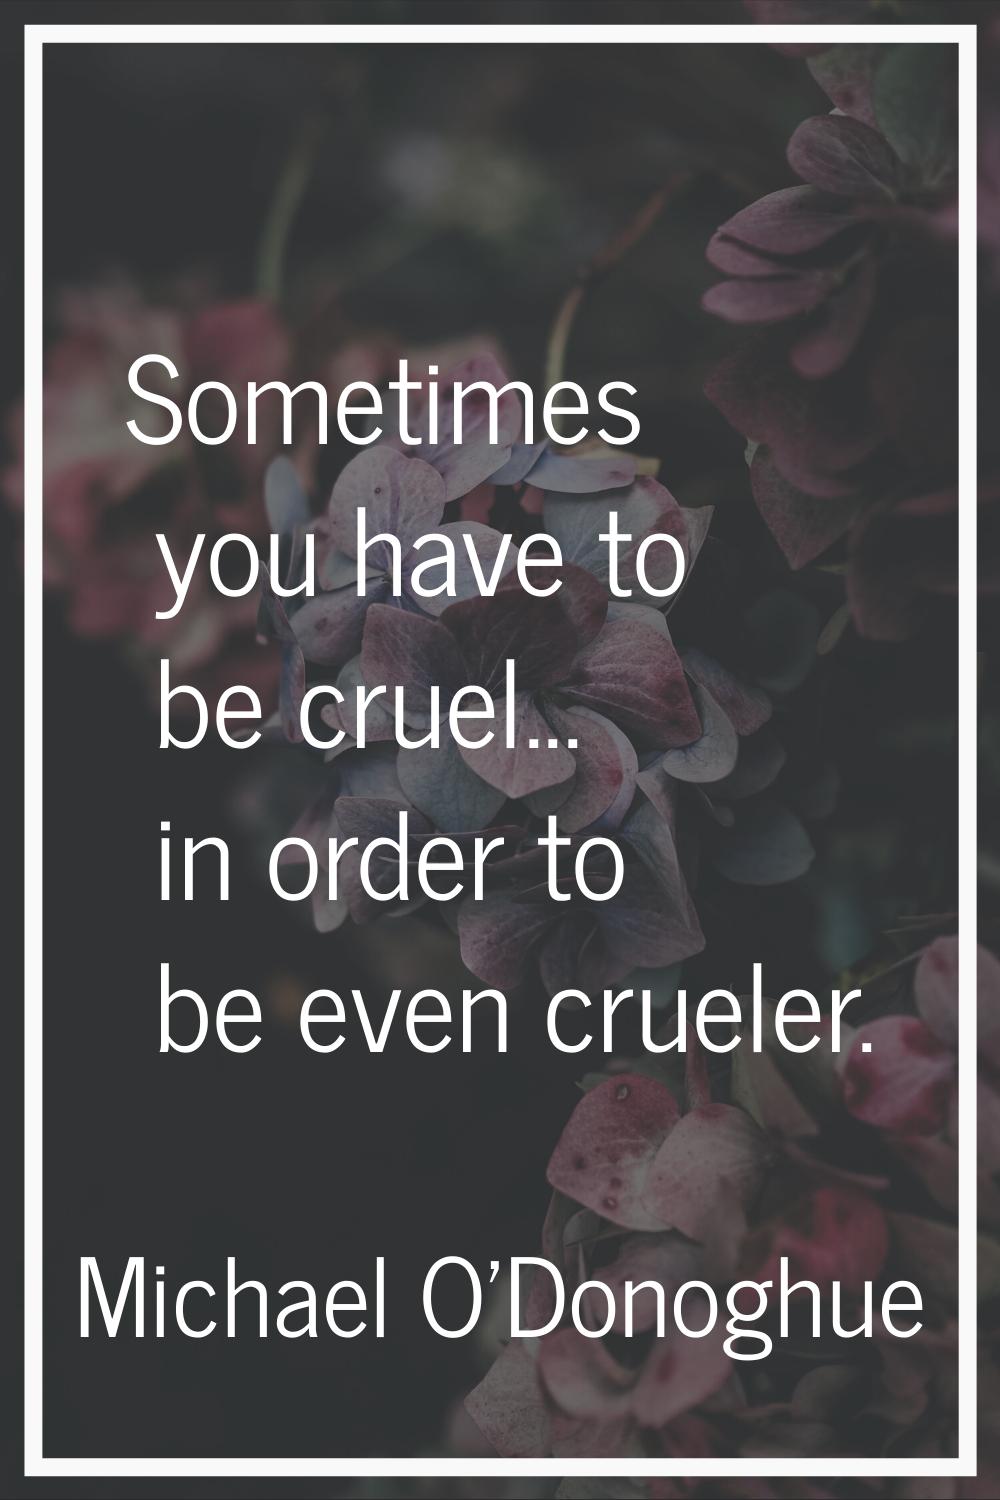 Sometimes you have to be cruel... in order to be even crueler.